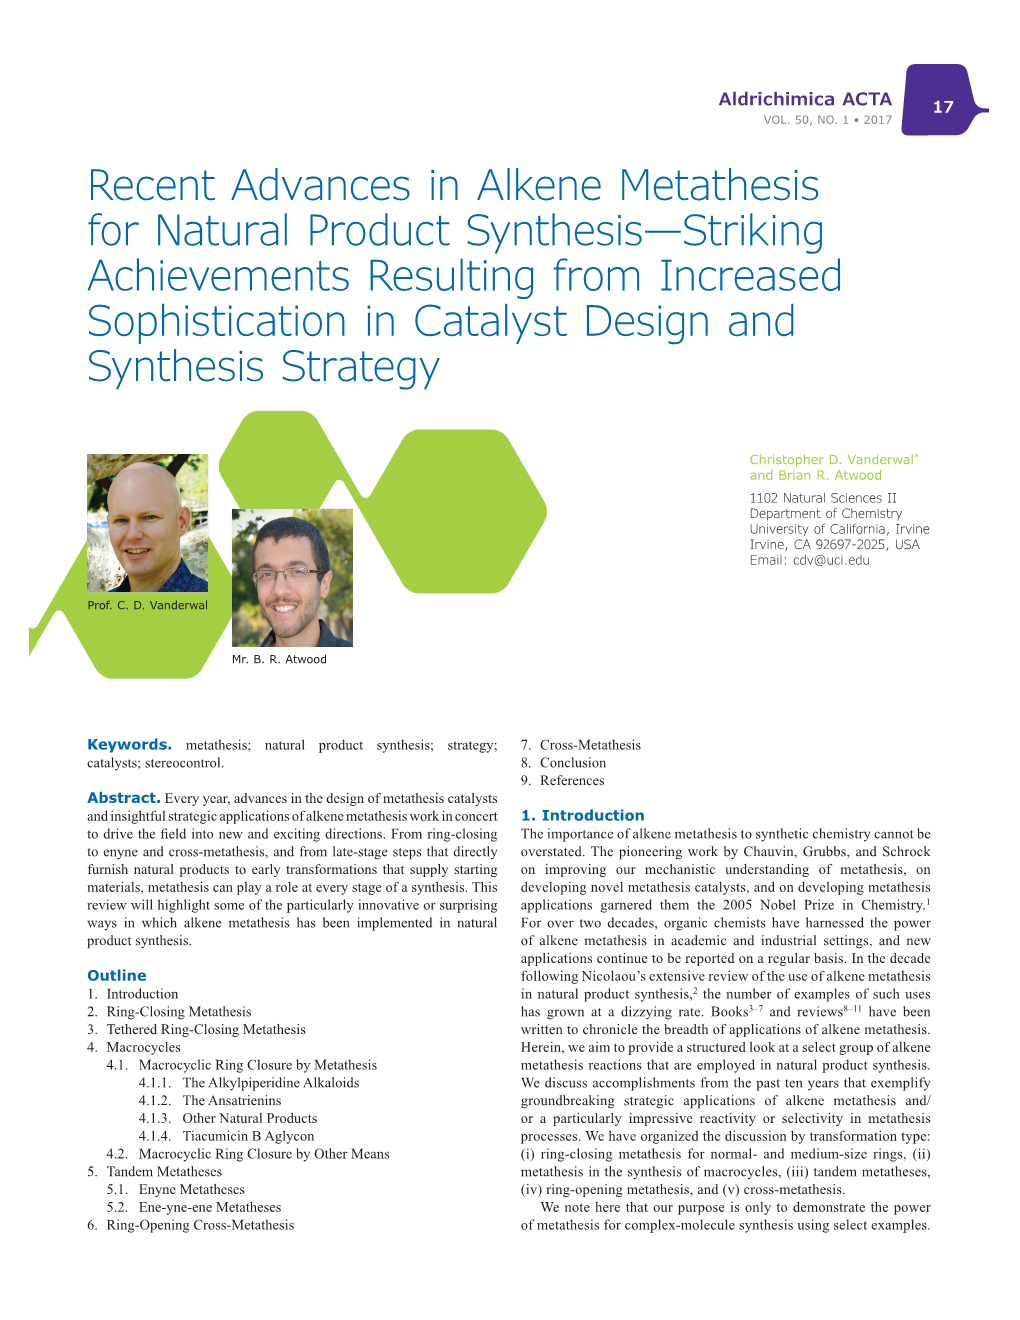 Recent Advances in Alkene Metathesis for Natural Product